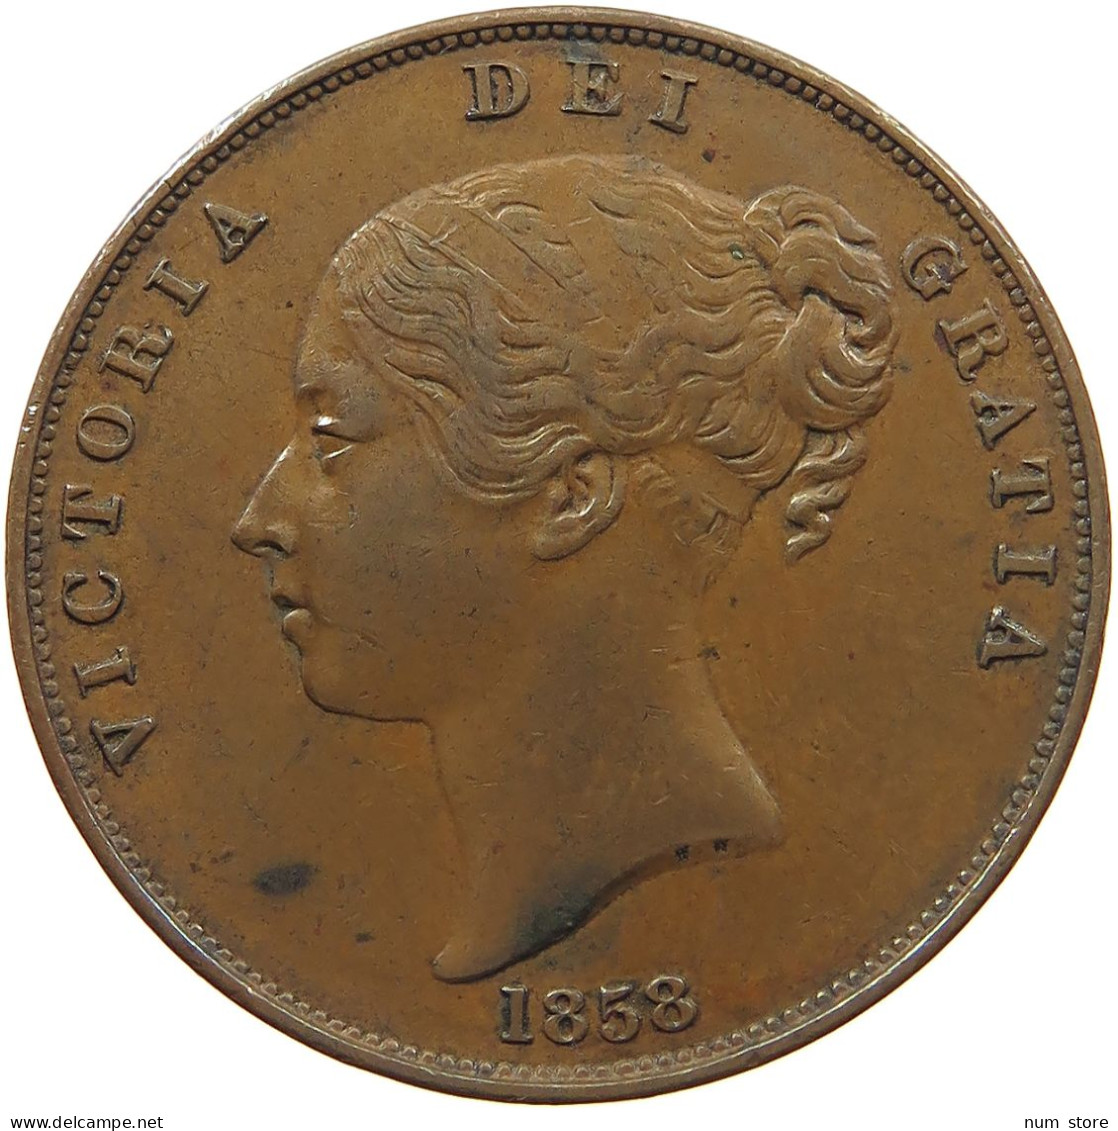 GREAT BRITAIN PENNY 1858 VICTORIA 1837-1901 #MA 022968 - D. 1 Penny